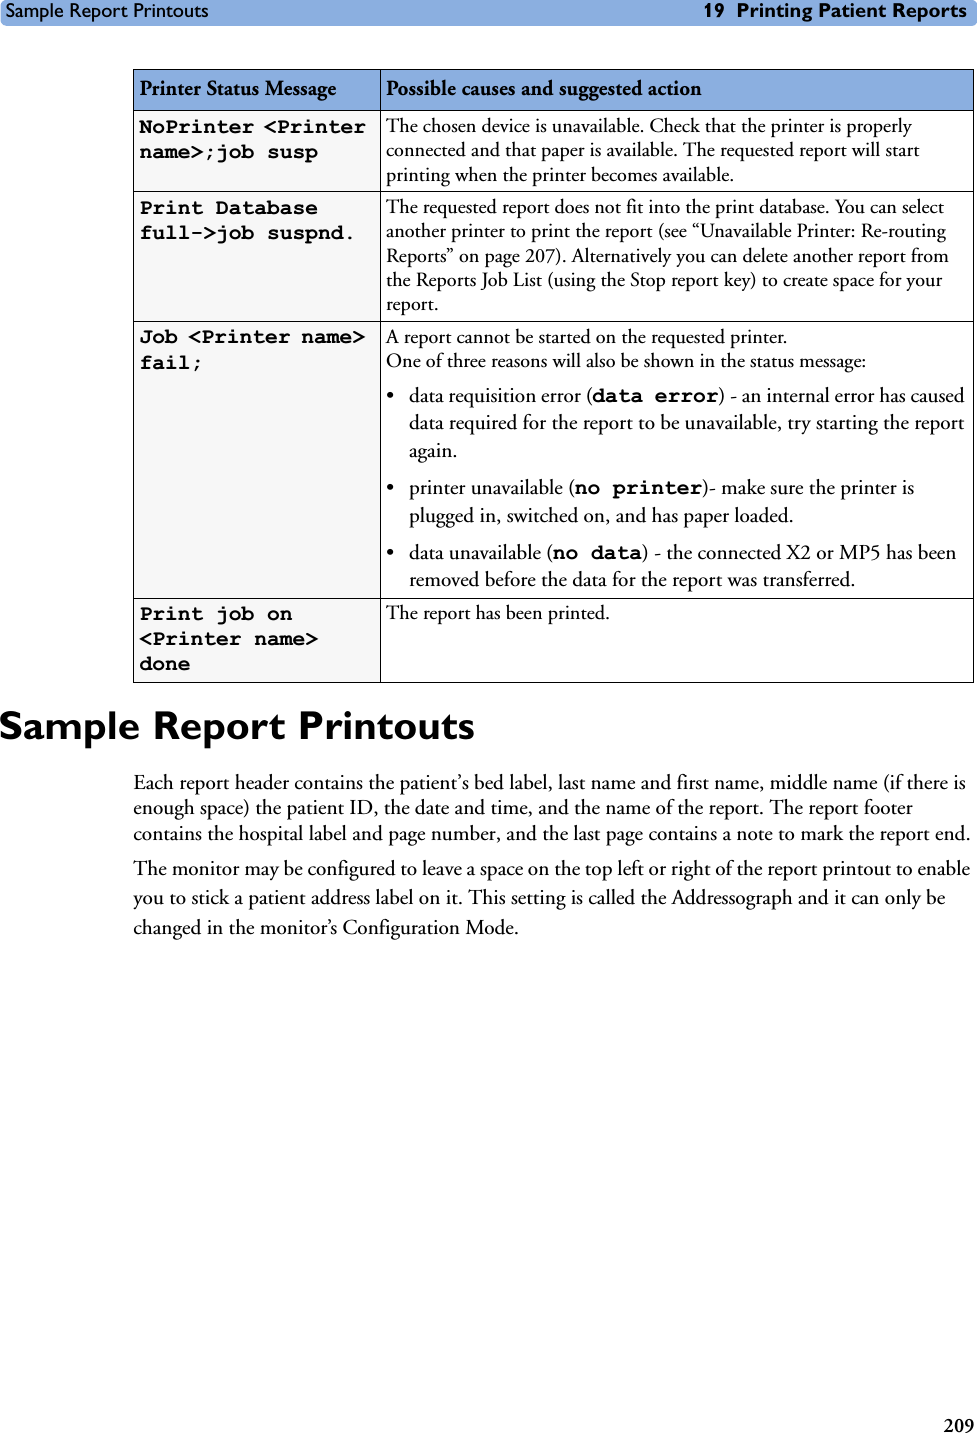 Sample Report Printouts 19 Printing Patient Reports209Sample Report PrintoutsEach report header contains the patient’s bed label, last name and first name, middle name (if there is enough space) the patient ID, the date and time, and the name of the report. The report footer contains the hospital label and page number, and the last page contains a note to mark the report end.The monitor may be configured to leave a space on the top left or right of the report printout to enable you to stick a patient address label on it. This setting is called the Addressograph and it can only be changed in the monitor’s Configuration Mode.NoPrinter &lt;Printer name&gt;;job suspThe chosen device is unavailable. Check that the printer is properly connected and that paper is available. The requested report will start printing when the printer becomes available.Print Database full-&gt;job suspnd.The requested report does not fit into the print database. You can select another printer to print the report (see “Unavailable Printer: Re-routing Reports” on page 207). Alternatively you can delete another report from the Reports Job List (using the Stop report key) to create space for your report. Job &lt;Printer name&gt; fail; A report cannot be started on the requested printer. One of three reasons will also be shown in the status message: • data requisition error (data error) - an internal error has caused data required for the report to be unavailable, try starting the report again.• printer unavailable (no printer)- make sure the printer is plugged in, switched on, and has paper loaded. • data unavailable (no data) - the connected X2 or MP5 has been removed before the data for the report was transferred.Print job on &lt;Printer name&gt; doneThe report has been printed. Printer Status Message Possible causes and suggested action